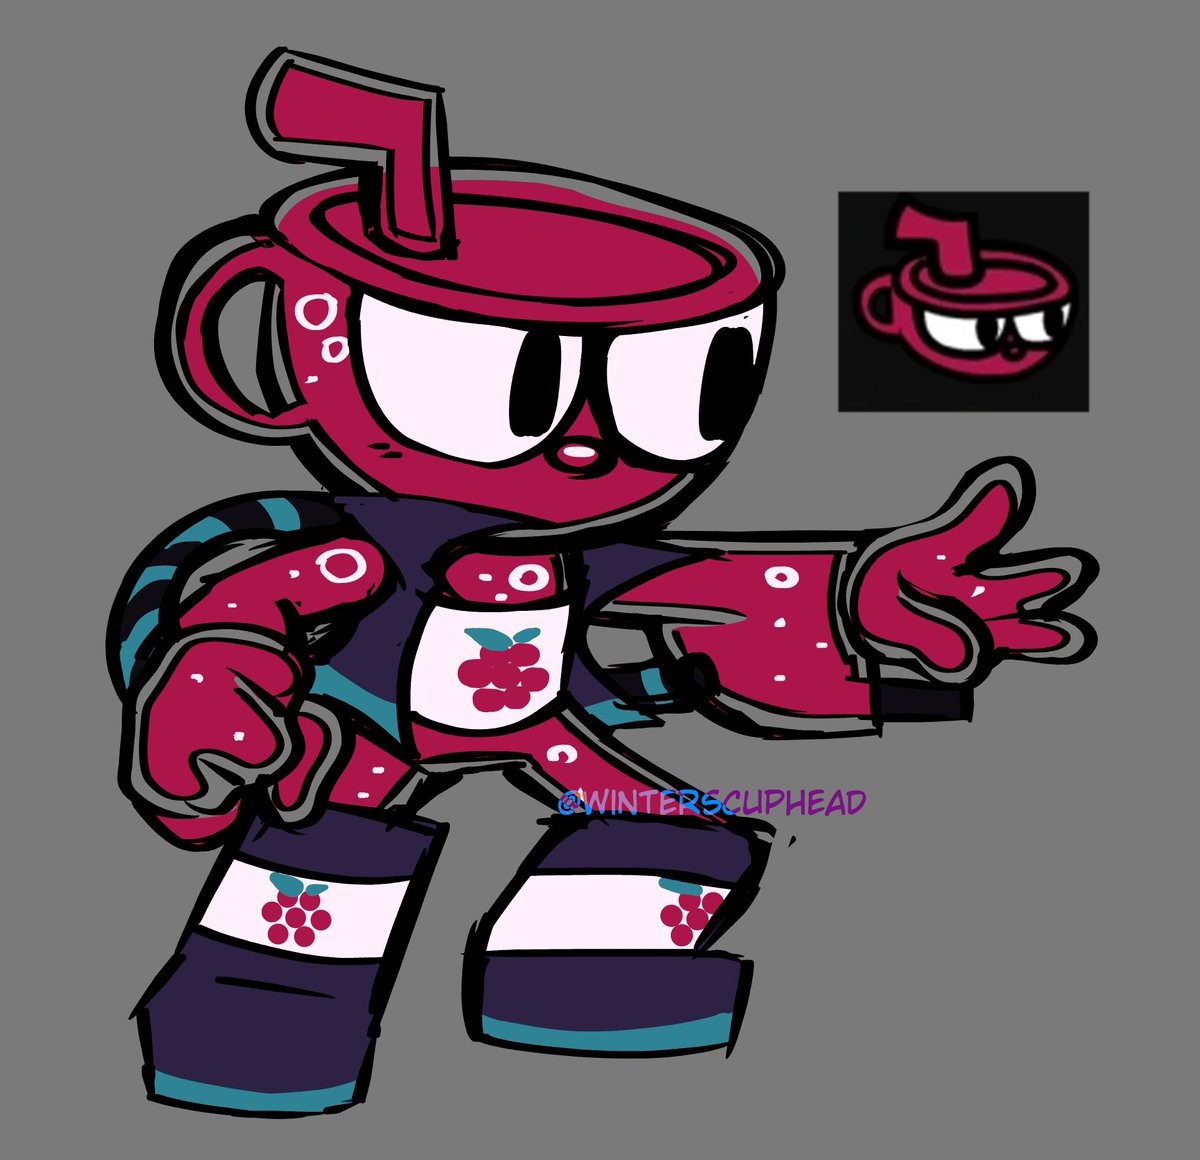 Indie cross cuphead concept by nothinjboisus on DeviantArt